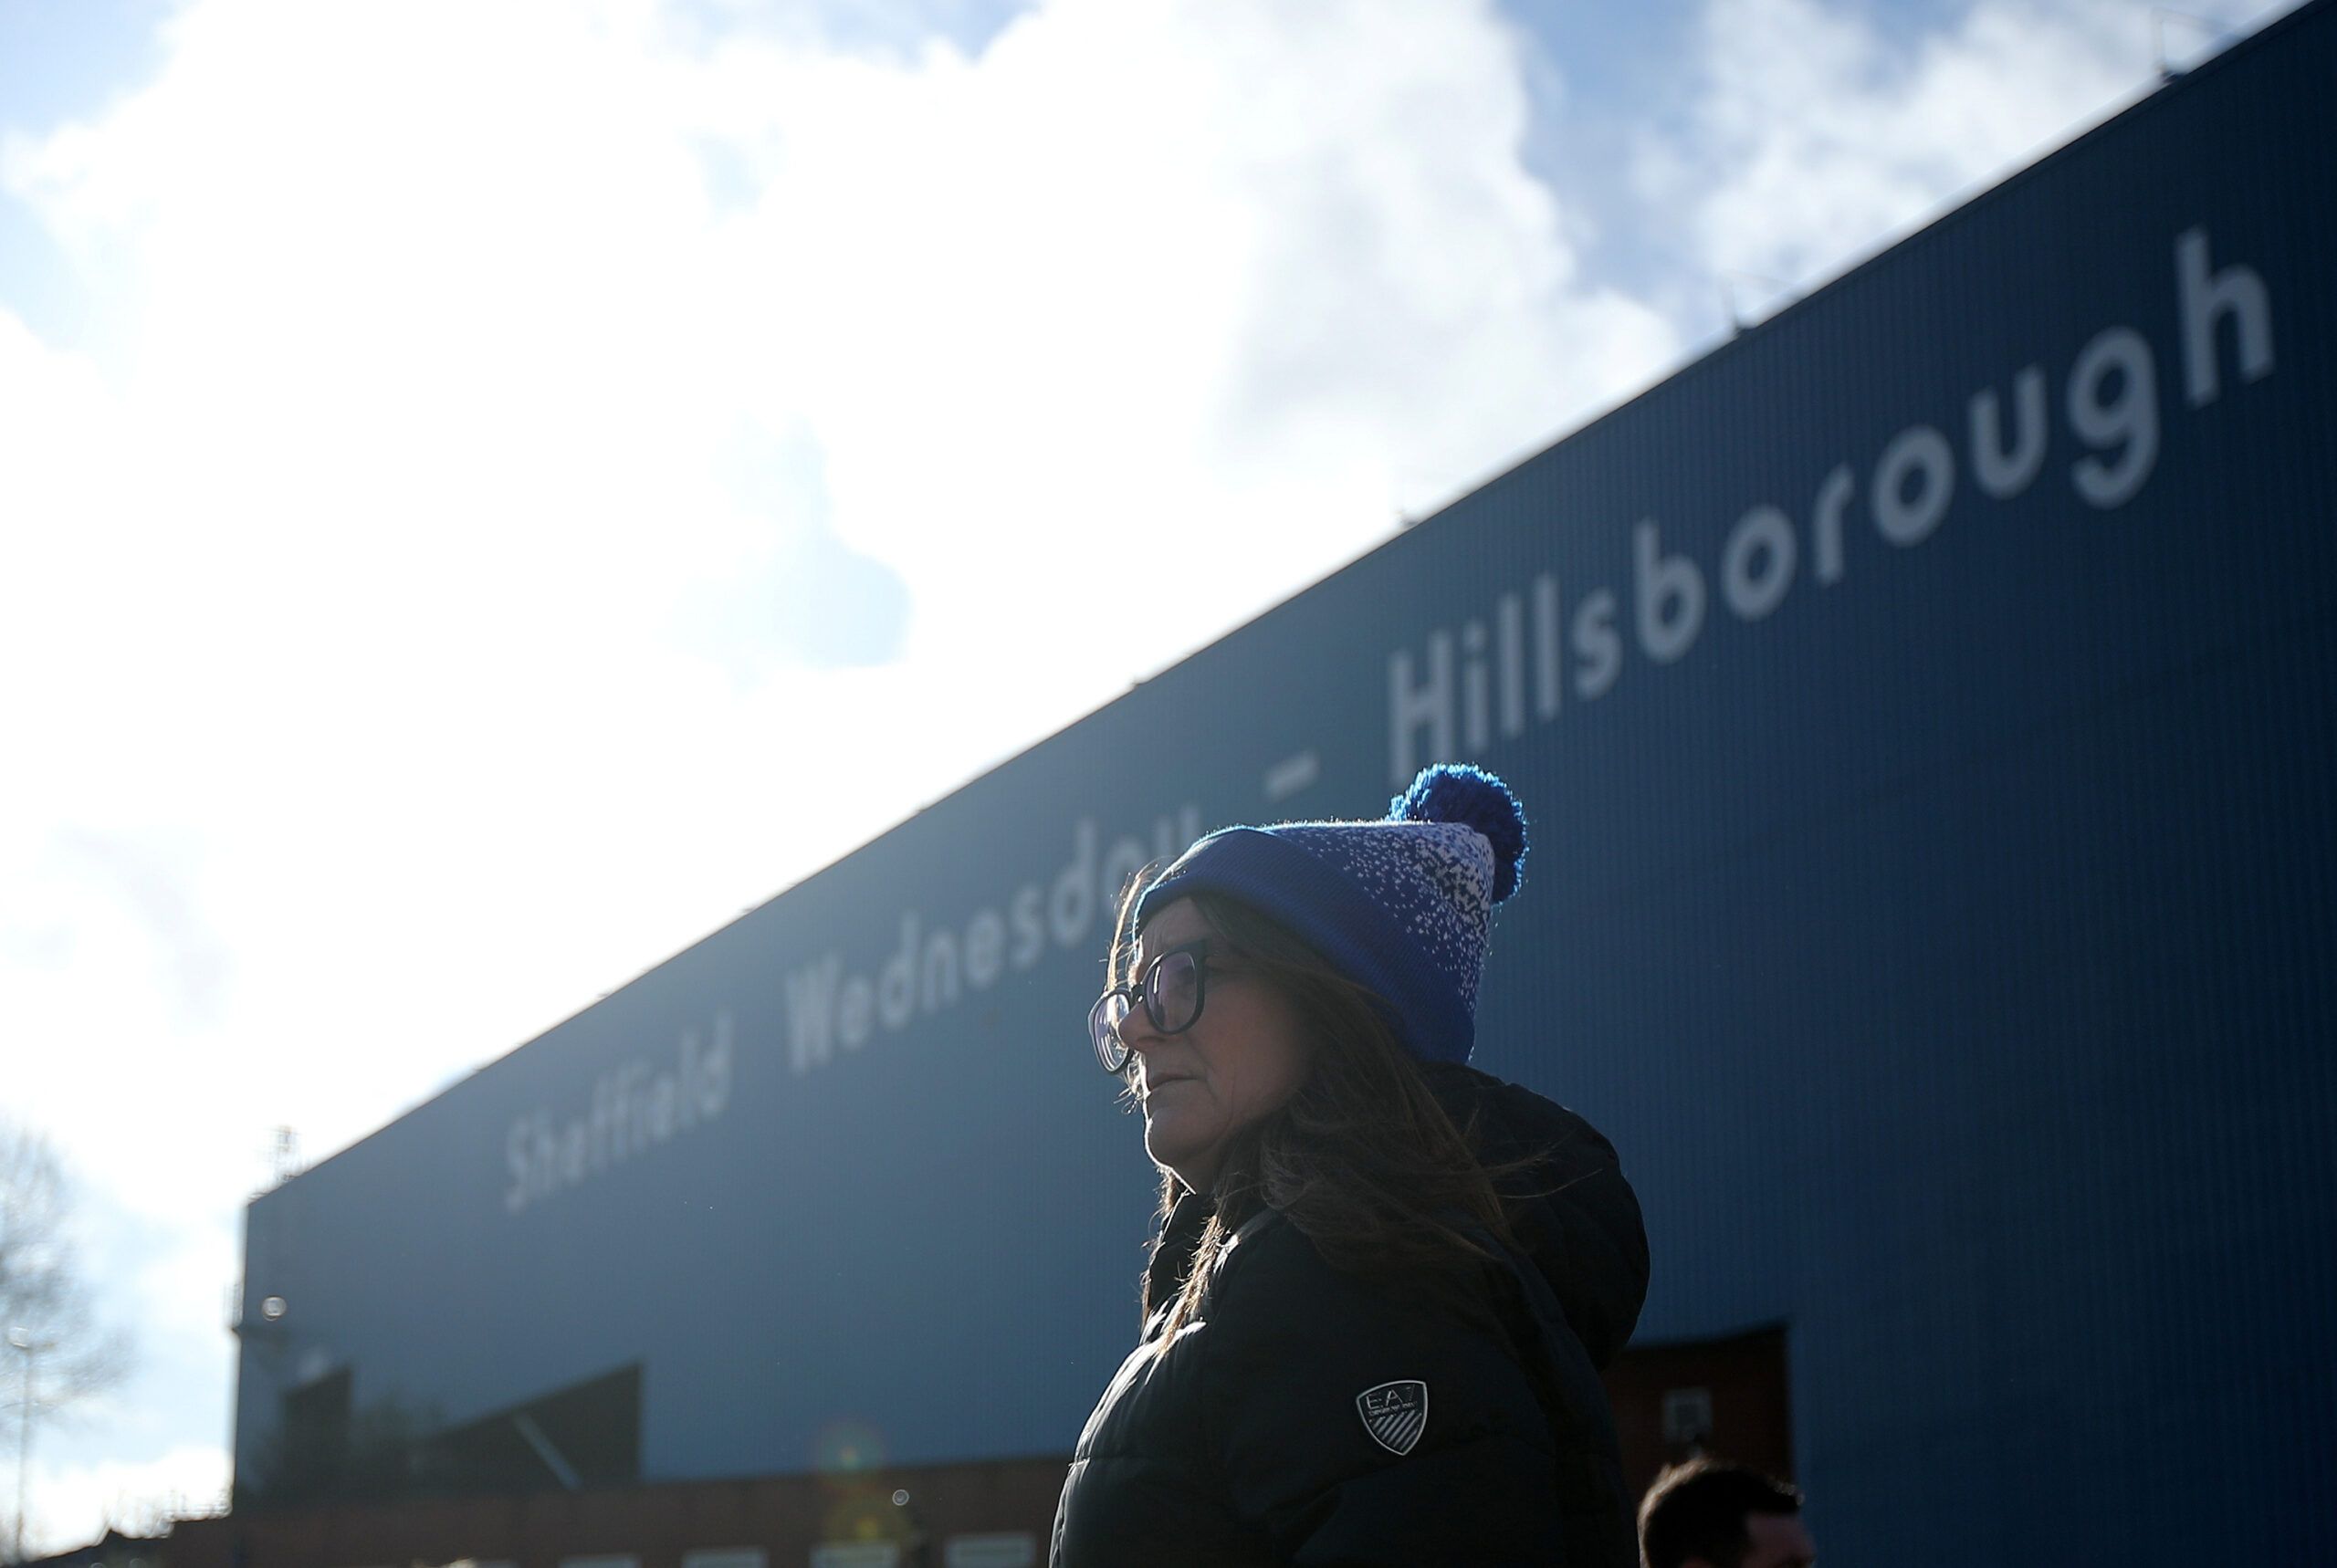 Soccer Football - Championship - Sheffield Wednesday v Derby County - Hillsborough, Sheffield, Britain - February 29, 2020   A fan outside the stadium before the match   Action Images/Molly Darlington    EDITORIAL USE ONLY. No use with unauthorized audio, video, data, fixture lists, club/league logos or 